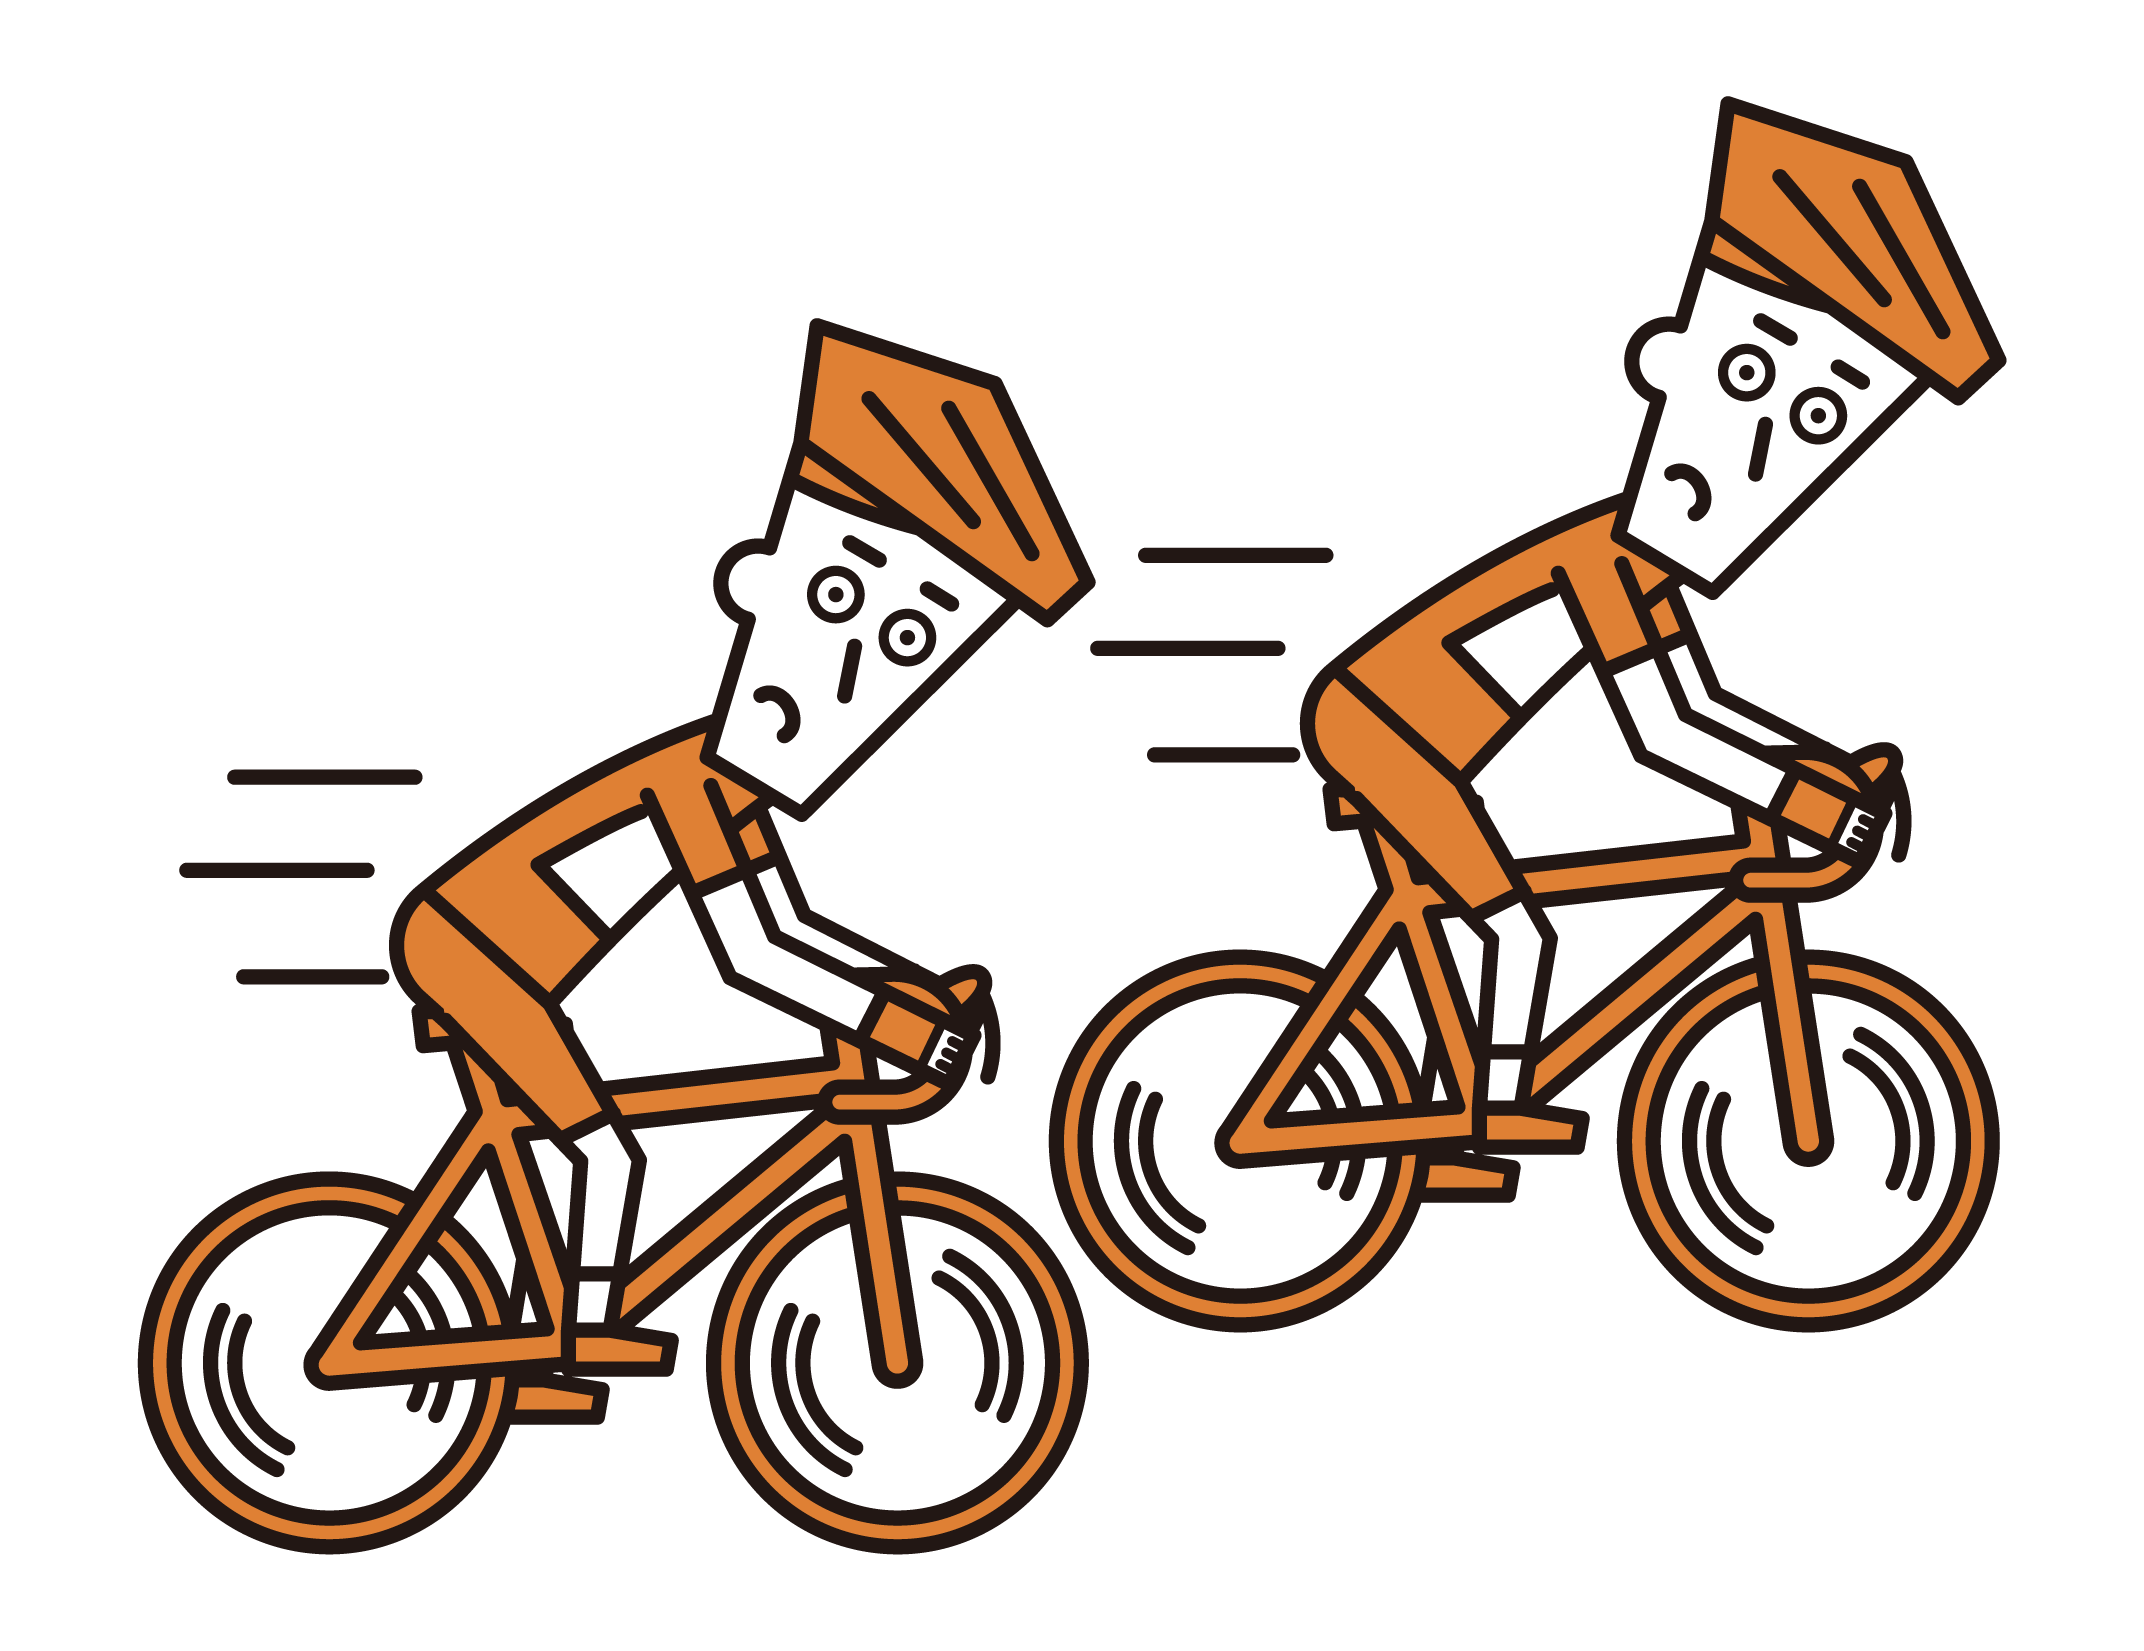 Illustration of road racers (male) racing